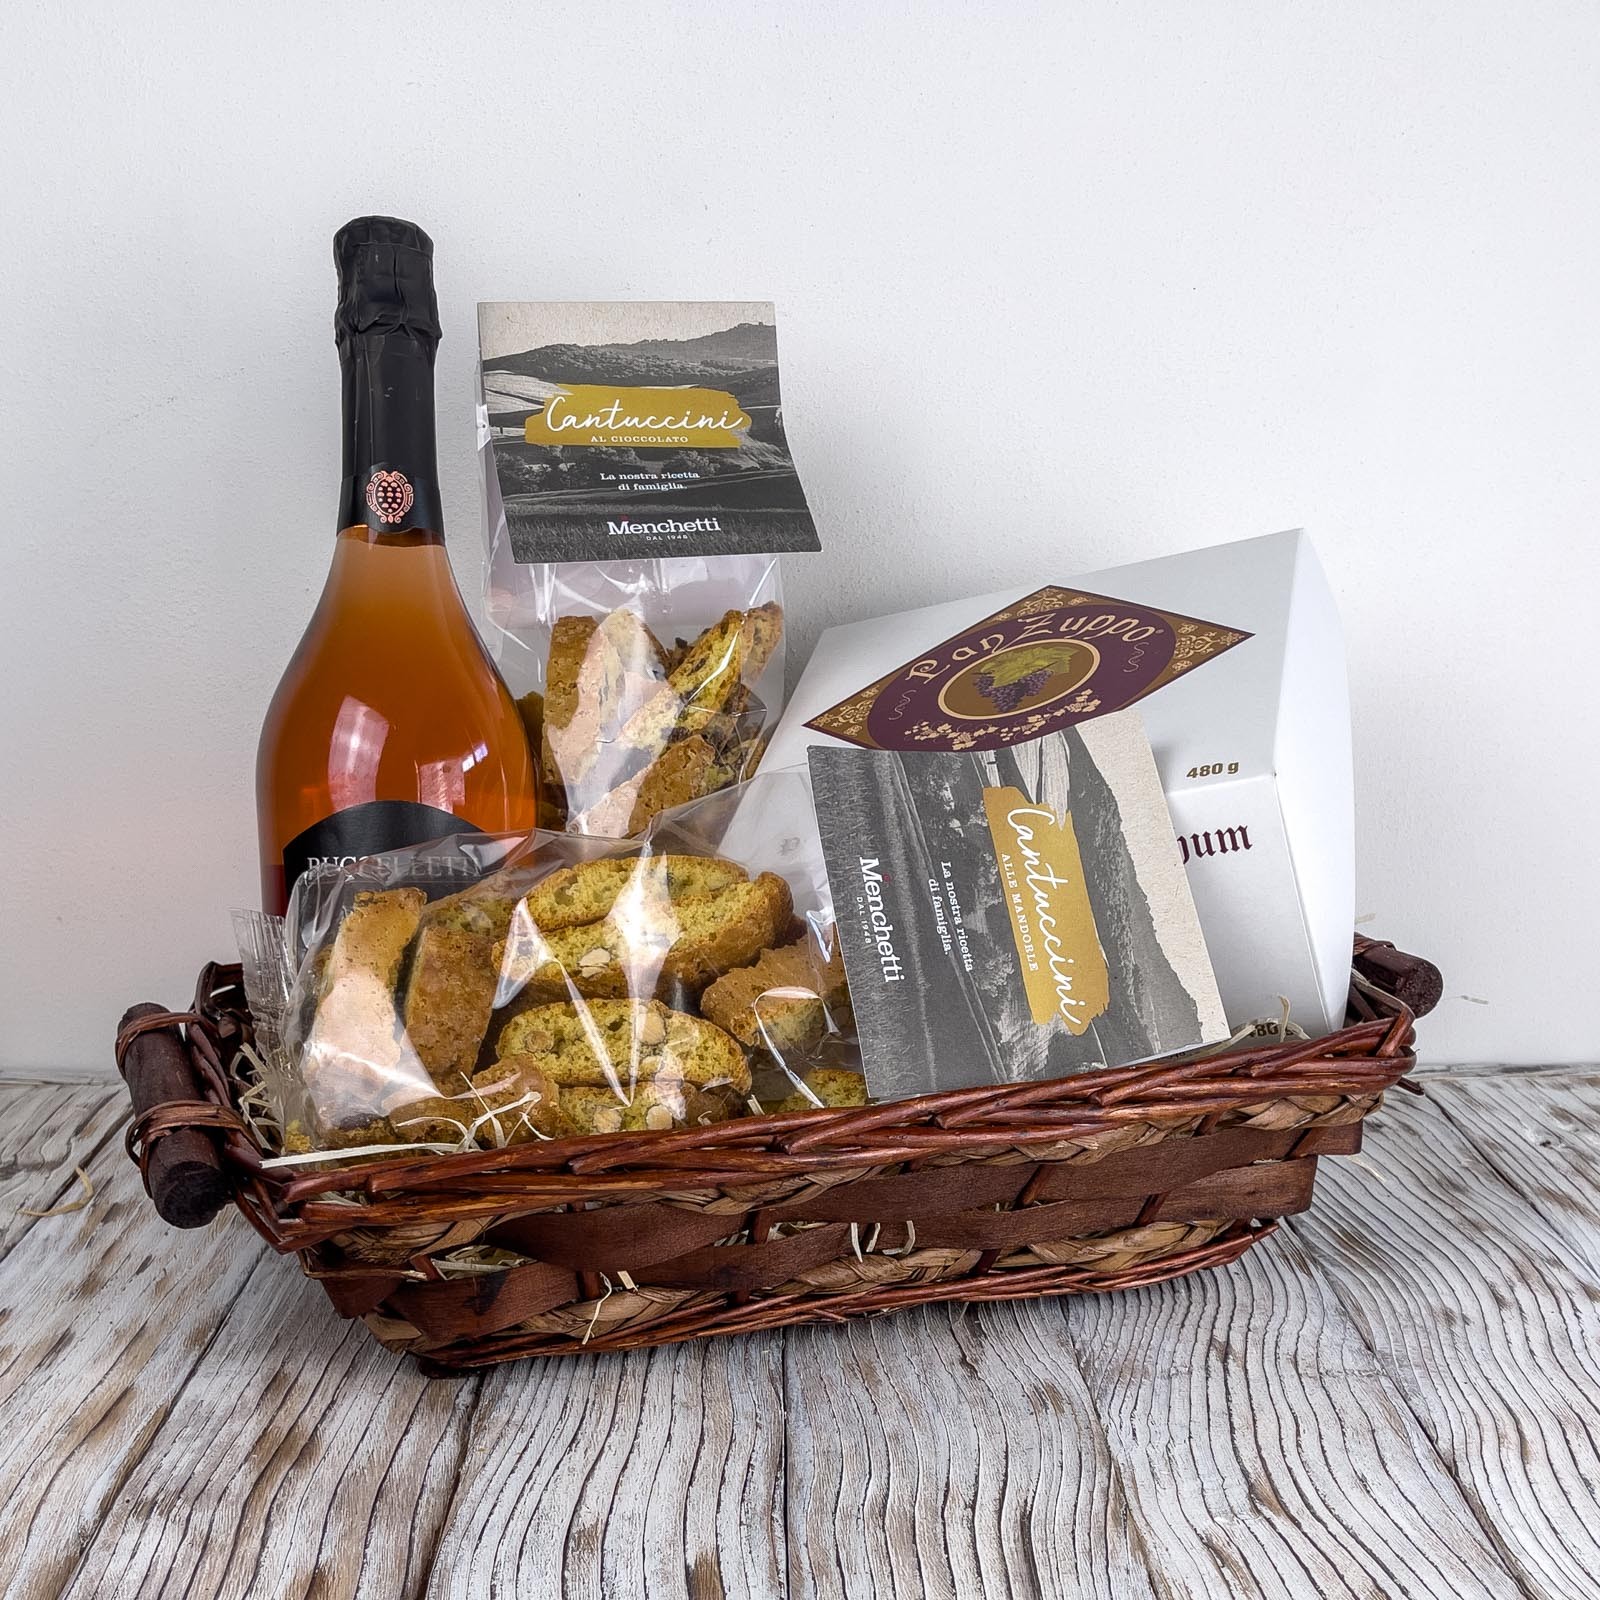 Gift Hamper consisting of a selection of 5 products for a total of about 2 kg. We will pack the basket and ship it wherever you want, there is also the possibility of adding a personalized card with a message.
For more information or product changes contact us in chat.